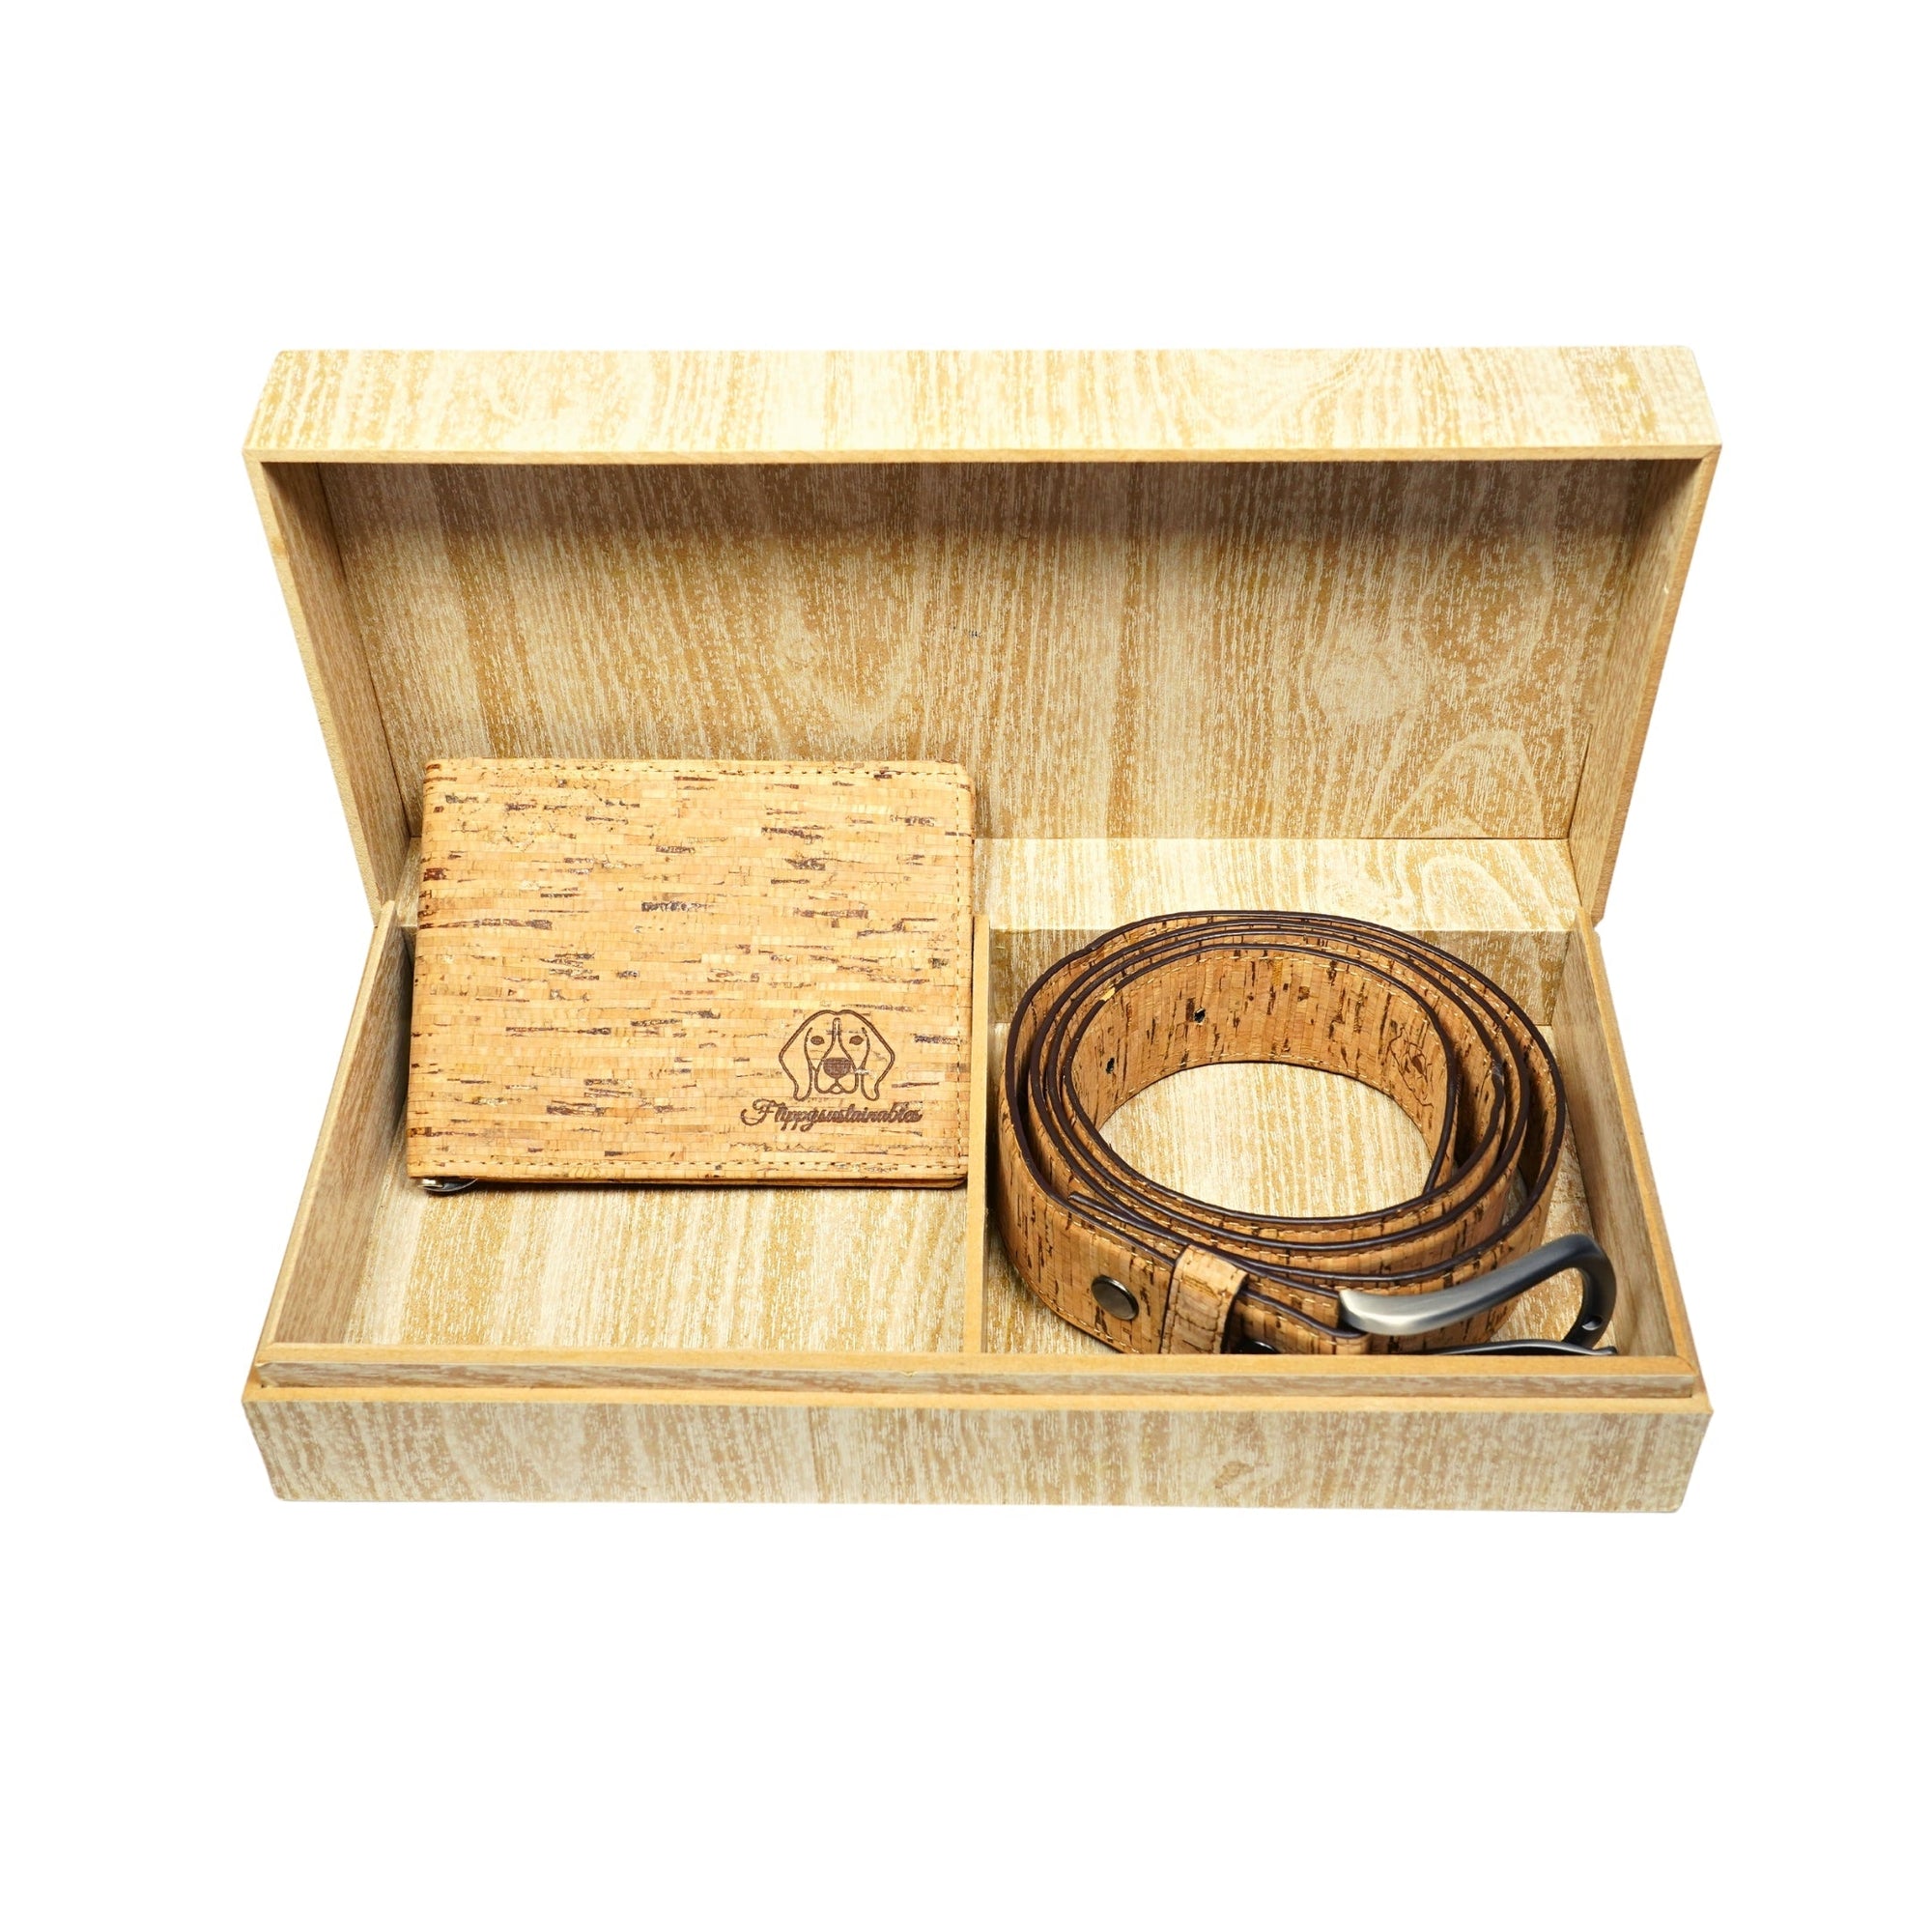 wooden gift box: gift hamper for him: premium vegan leather black dune belt and beige ravine wallet | customized combo surprise gift box by flippysustainables | fit for corporate gifting for clients and colleagues 			